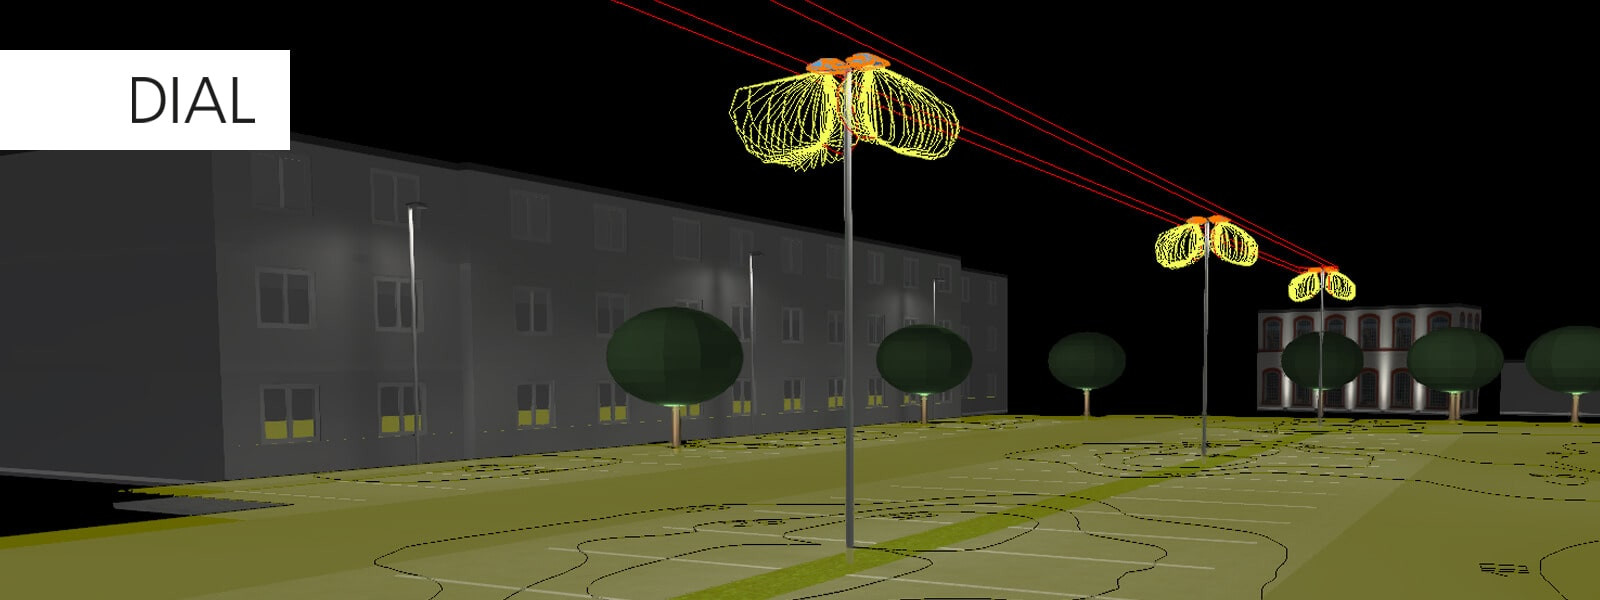 Online course: DIALux evo for outdoor lighting - DIAL GmbH